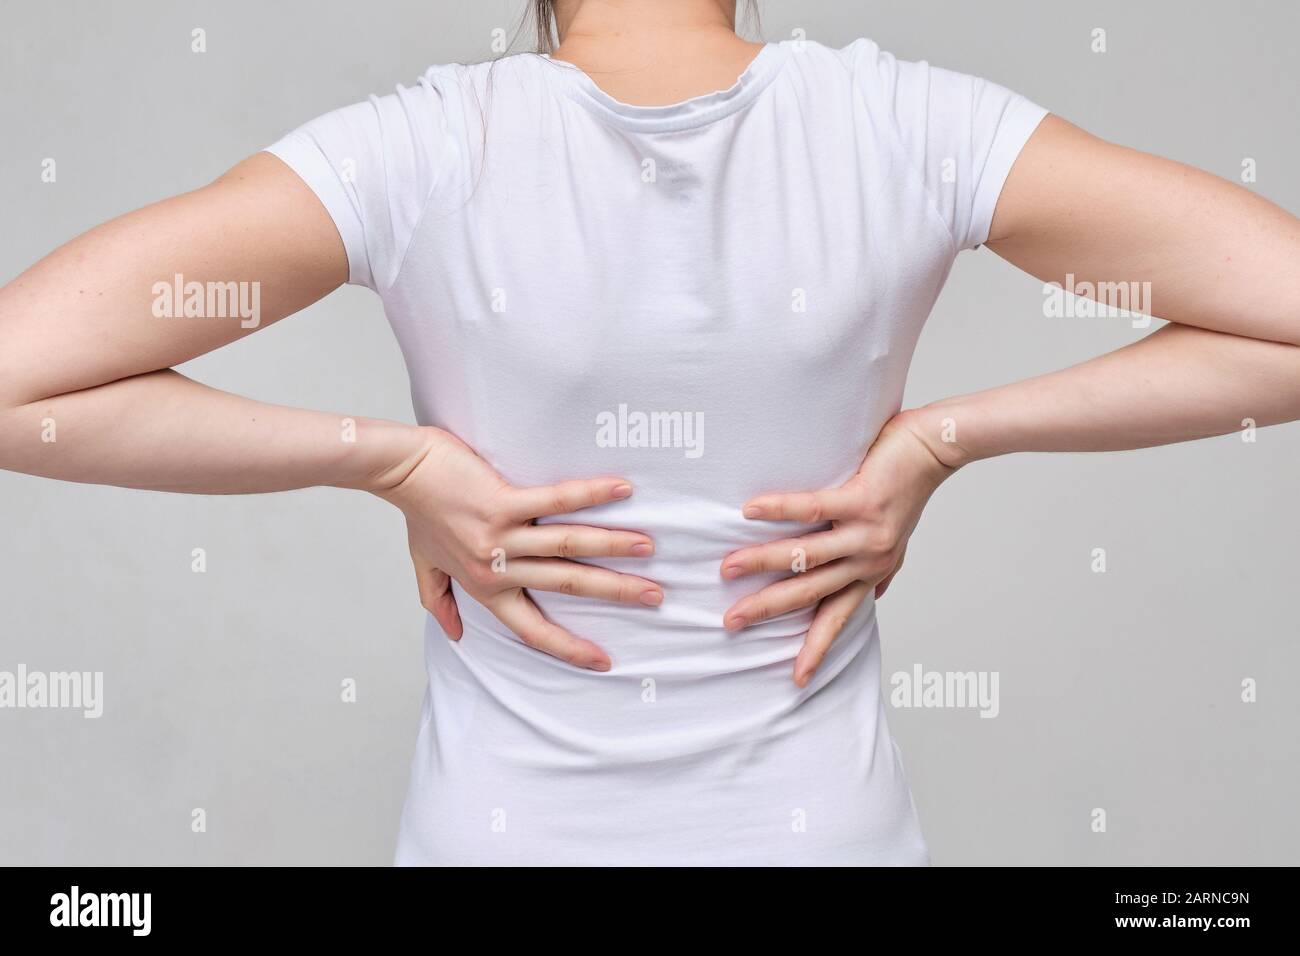 A Girl in a White T-shirt Massages the Groin. Gynecology Problems Stock  Photo - Image of background, girl: 172264378